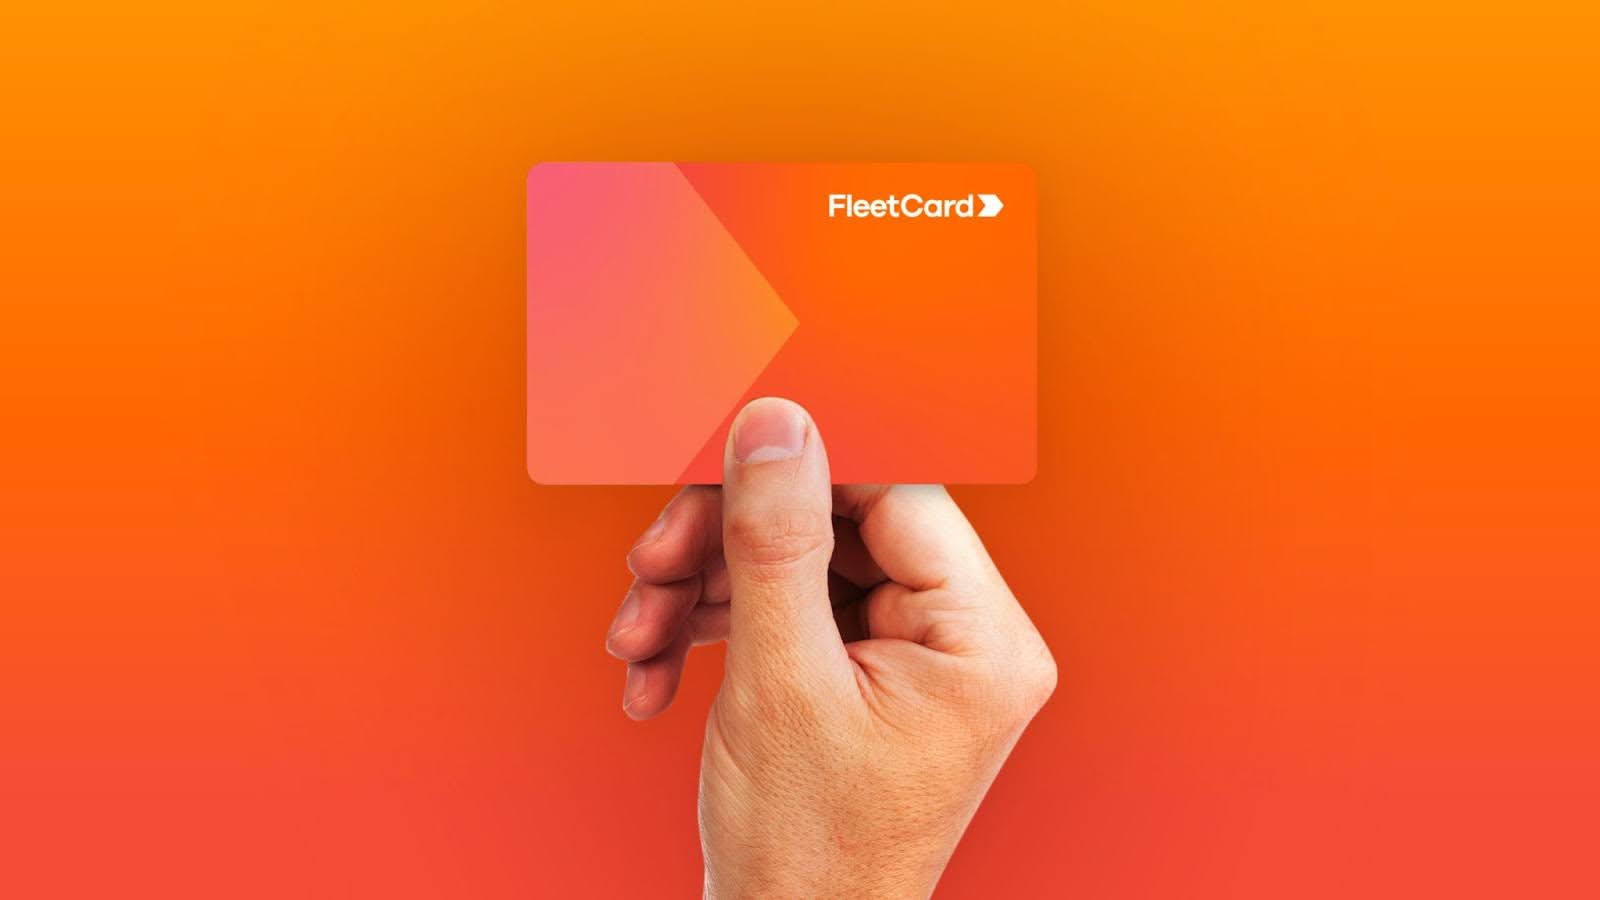 See how FleetCard is saving businesses money